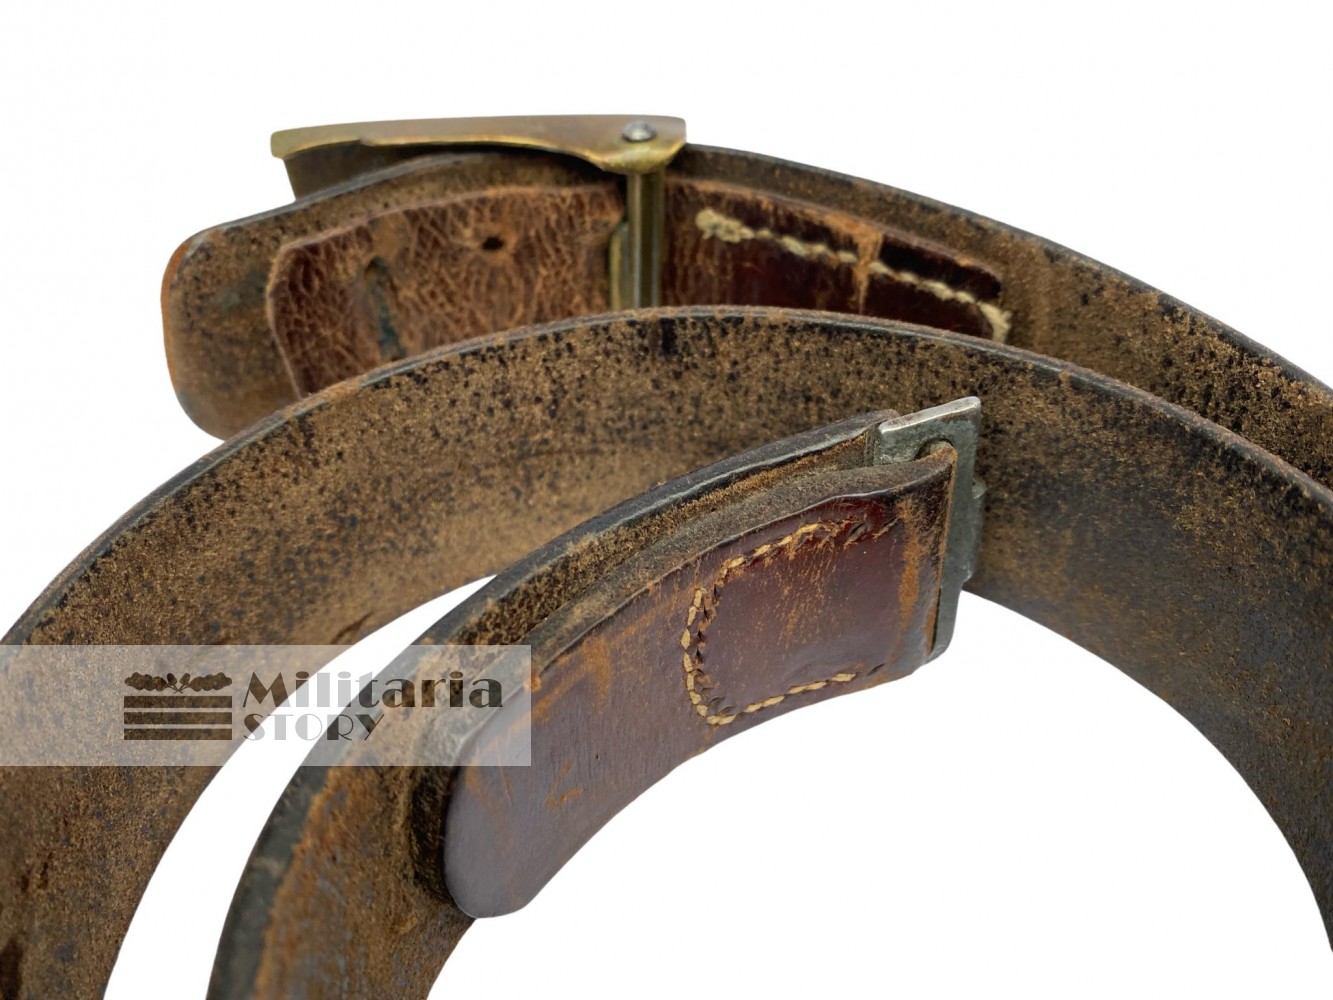 WWI Prussian belt with buckle - WWI Prussian belt with buckle: Third Reich Equipment